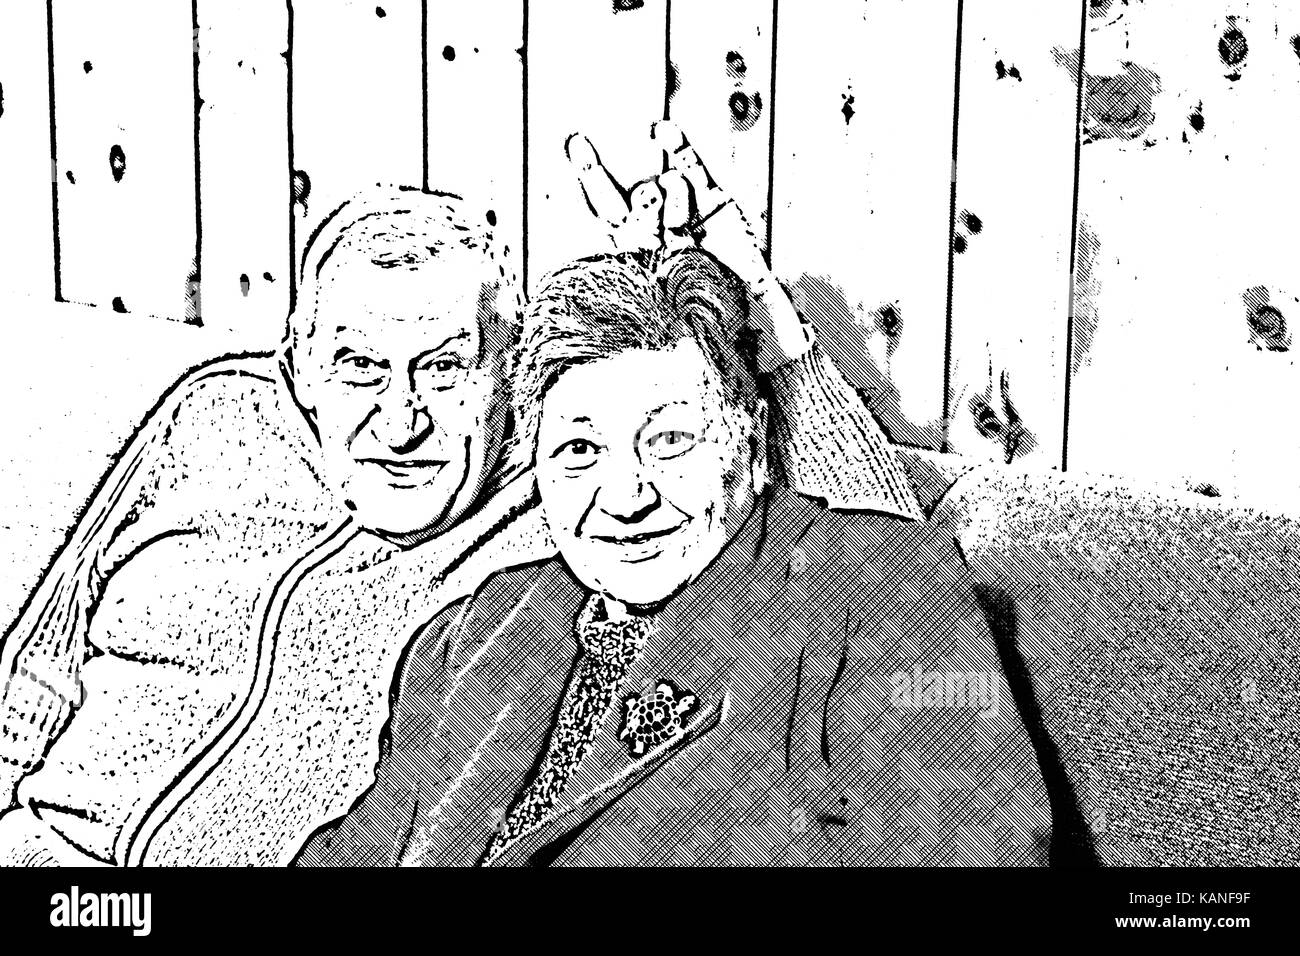 elderly couple kidding while sitting on the sofa in their living room, the man make horns sign on the head of his wife Stock Photo